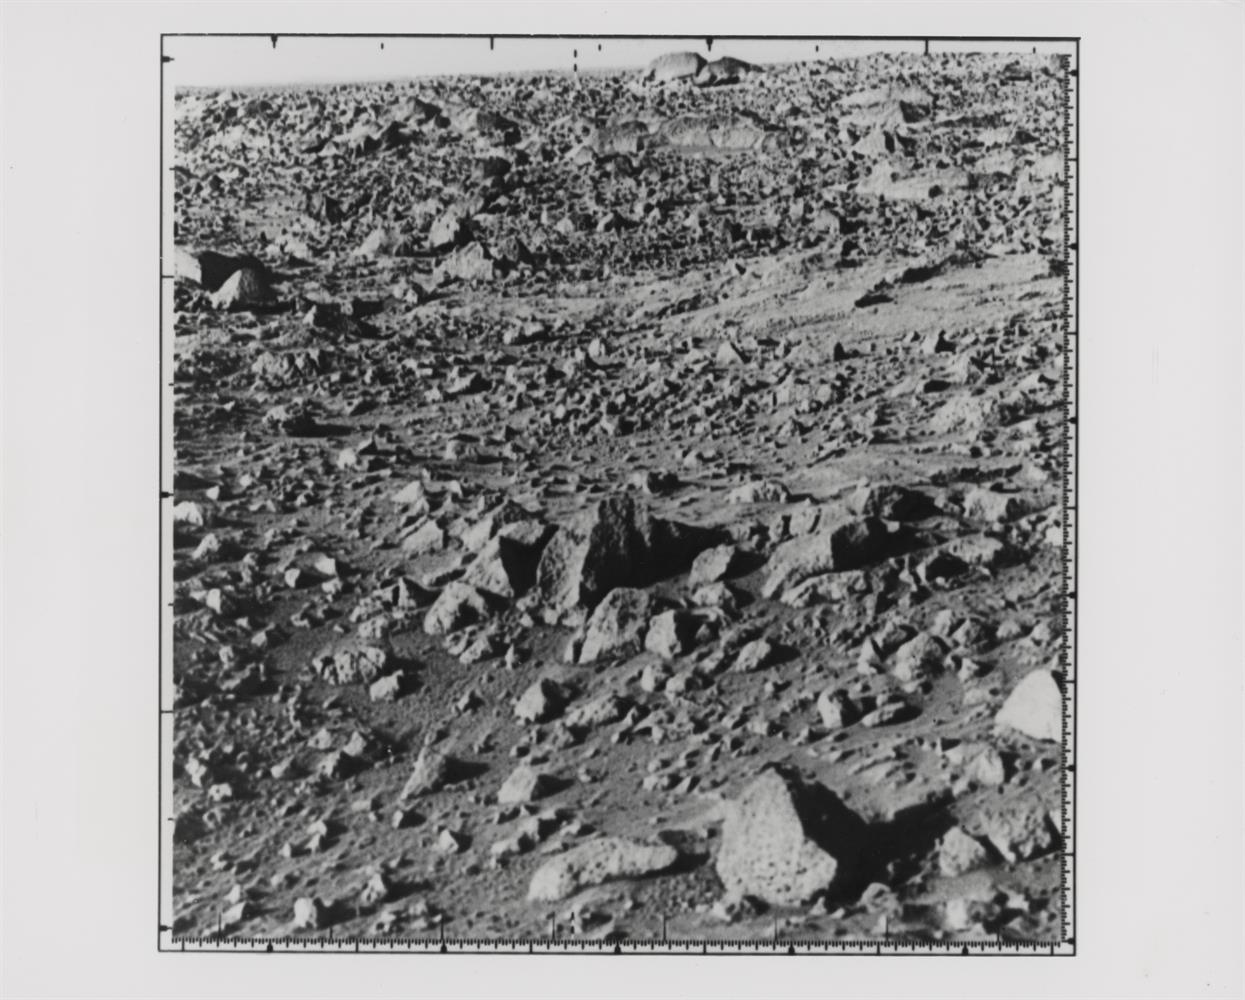 Martian soil and weather investigations (3 views), Viking Lander 1, Jul - Aug 1976 - Image 4 of 7